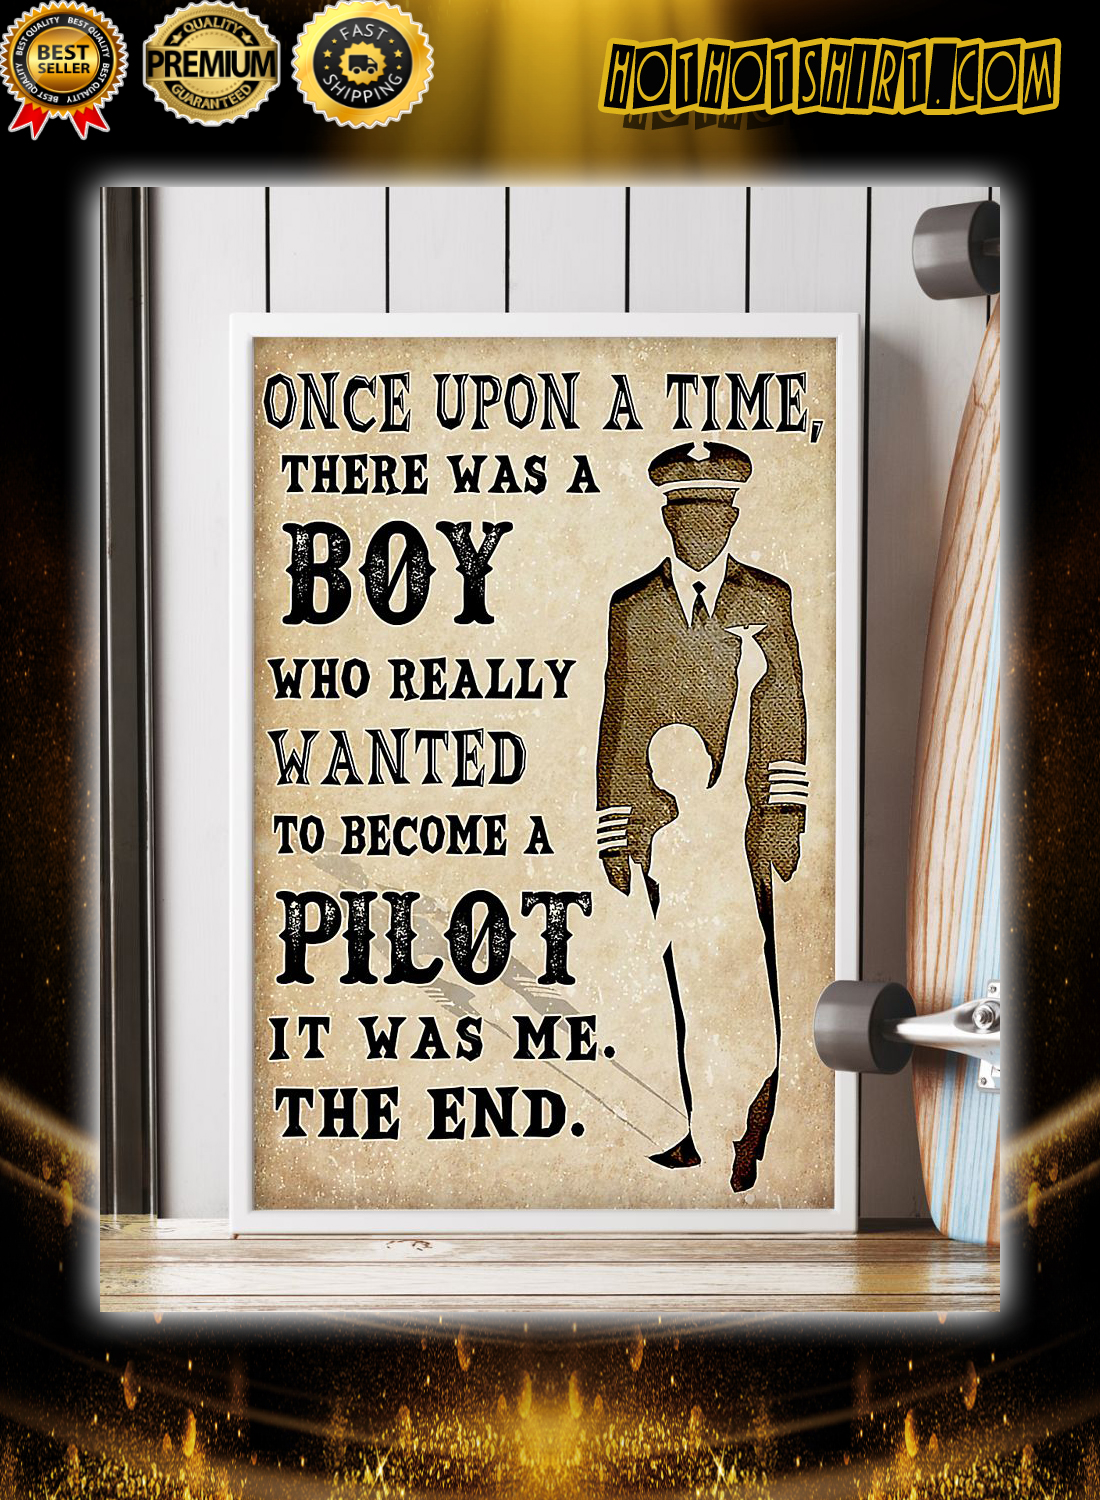 Once upon a time there was a boy who really wanted to become a pilot it was me the end poster